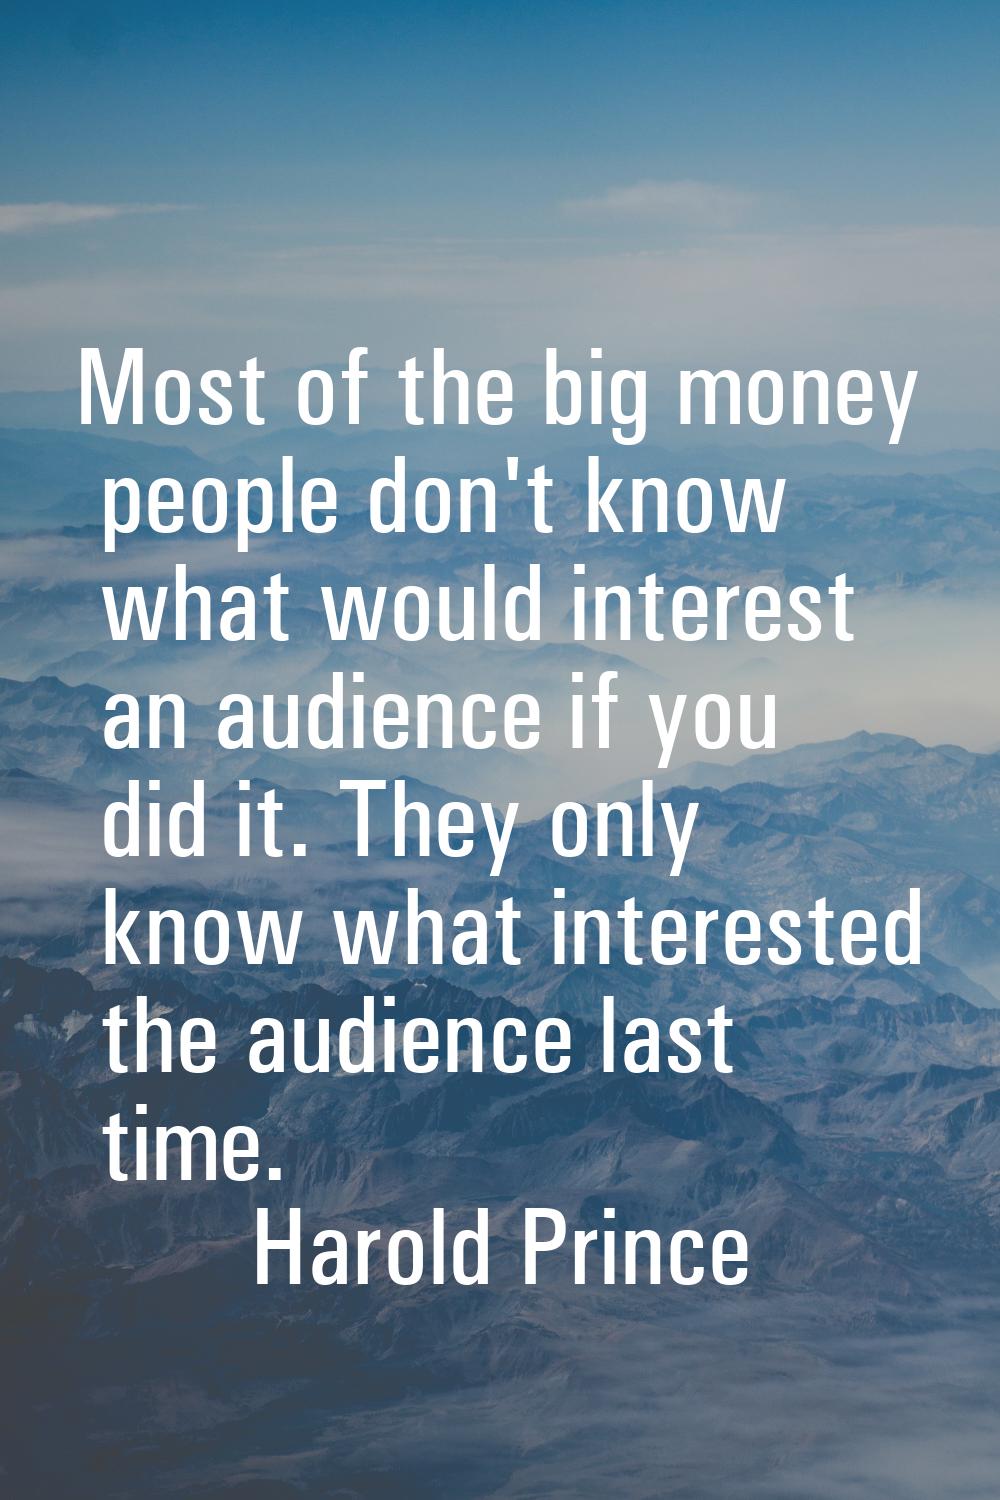 Most of the big money people don't know what would interest an audience if you did it. They only kn